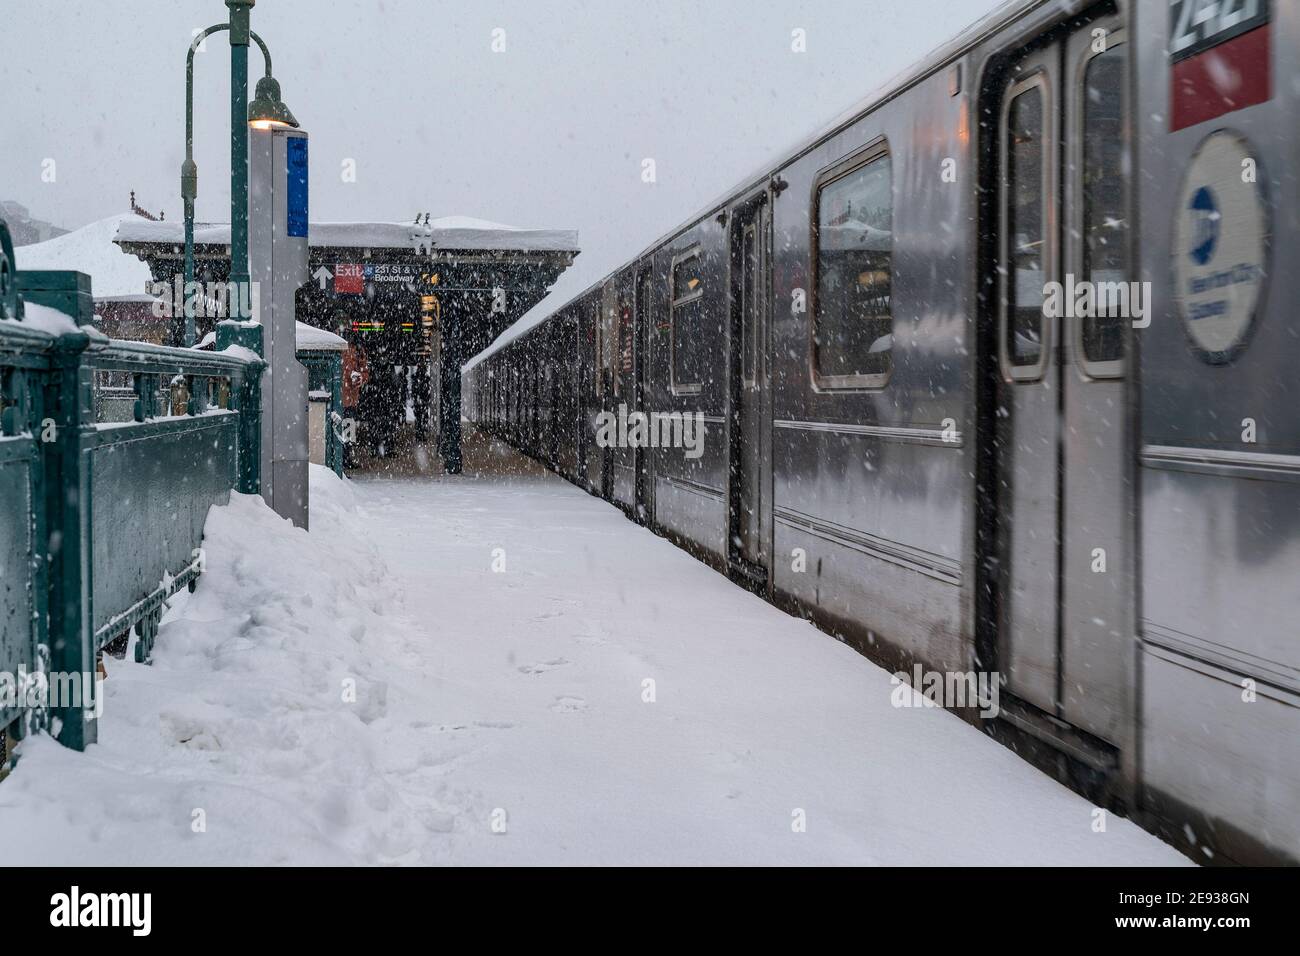 New York, United States. 01st Feb, 2021. View of subway train on elevated above ground station covered with snow as major storm cover New York City with more than a foot expected on the ground. This snow storm called nor'easter storm. Heavy snowfall expected to continue for more than 24 hours. Snow storm impacted all North East of the US. (Photo by Lev Radin/Pacific Press) Credit: Pacific Press Media Production Corp./Alamy Live News Stock Photo